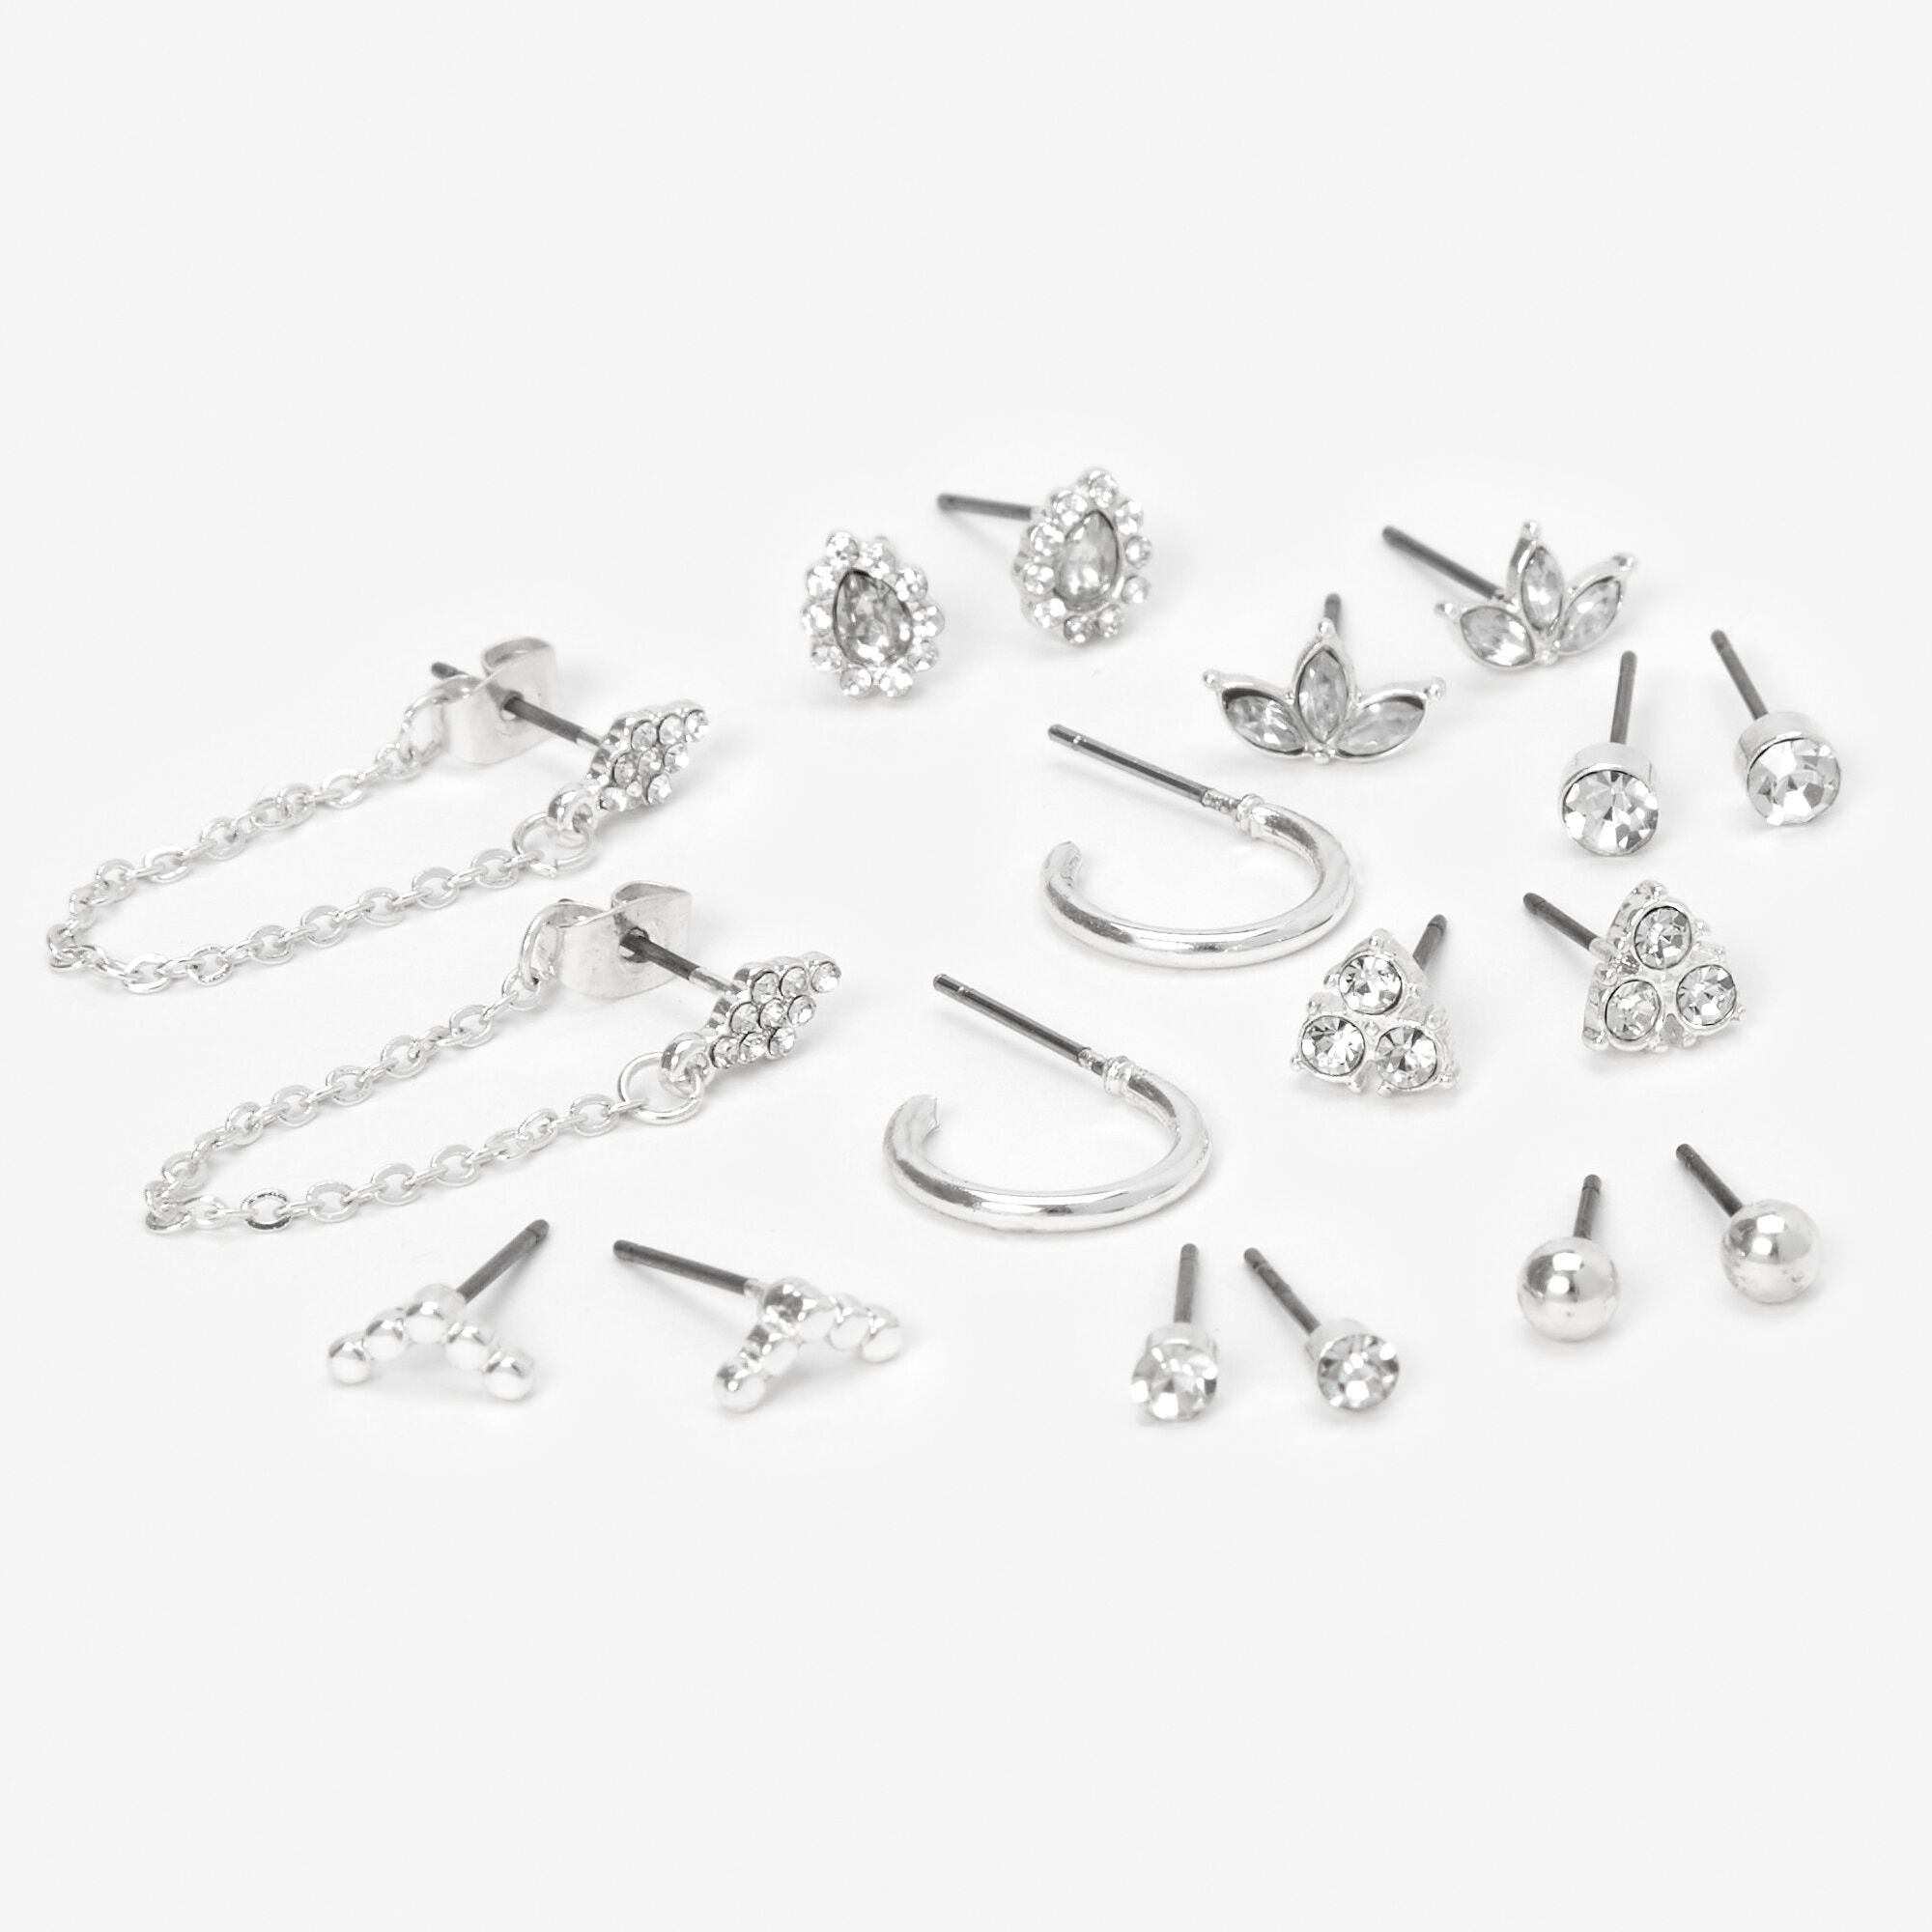 View Claires Fancy Crystal Mixed Earrings 9 Pack Silver information